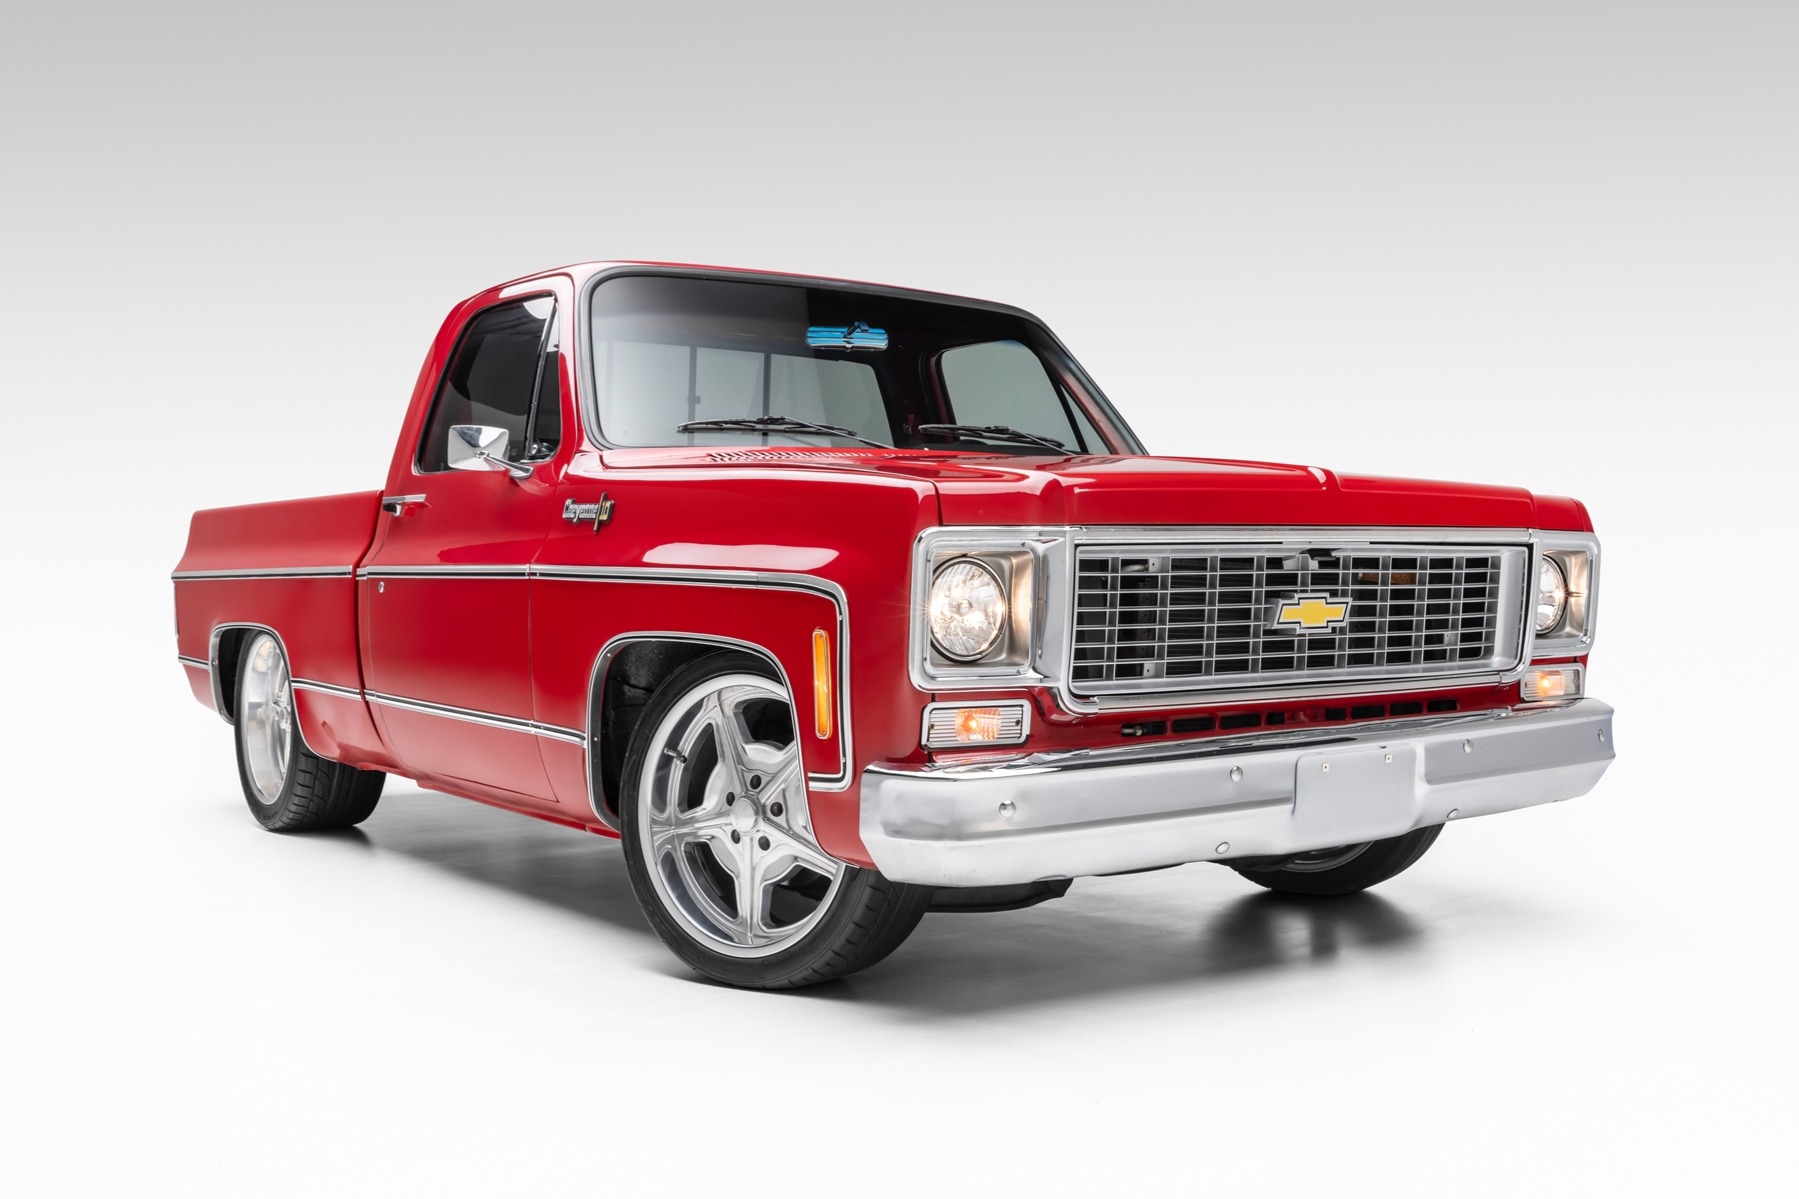 Used 350-Powered 1973 Chevrolet C10 Review